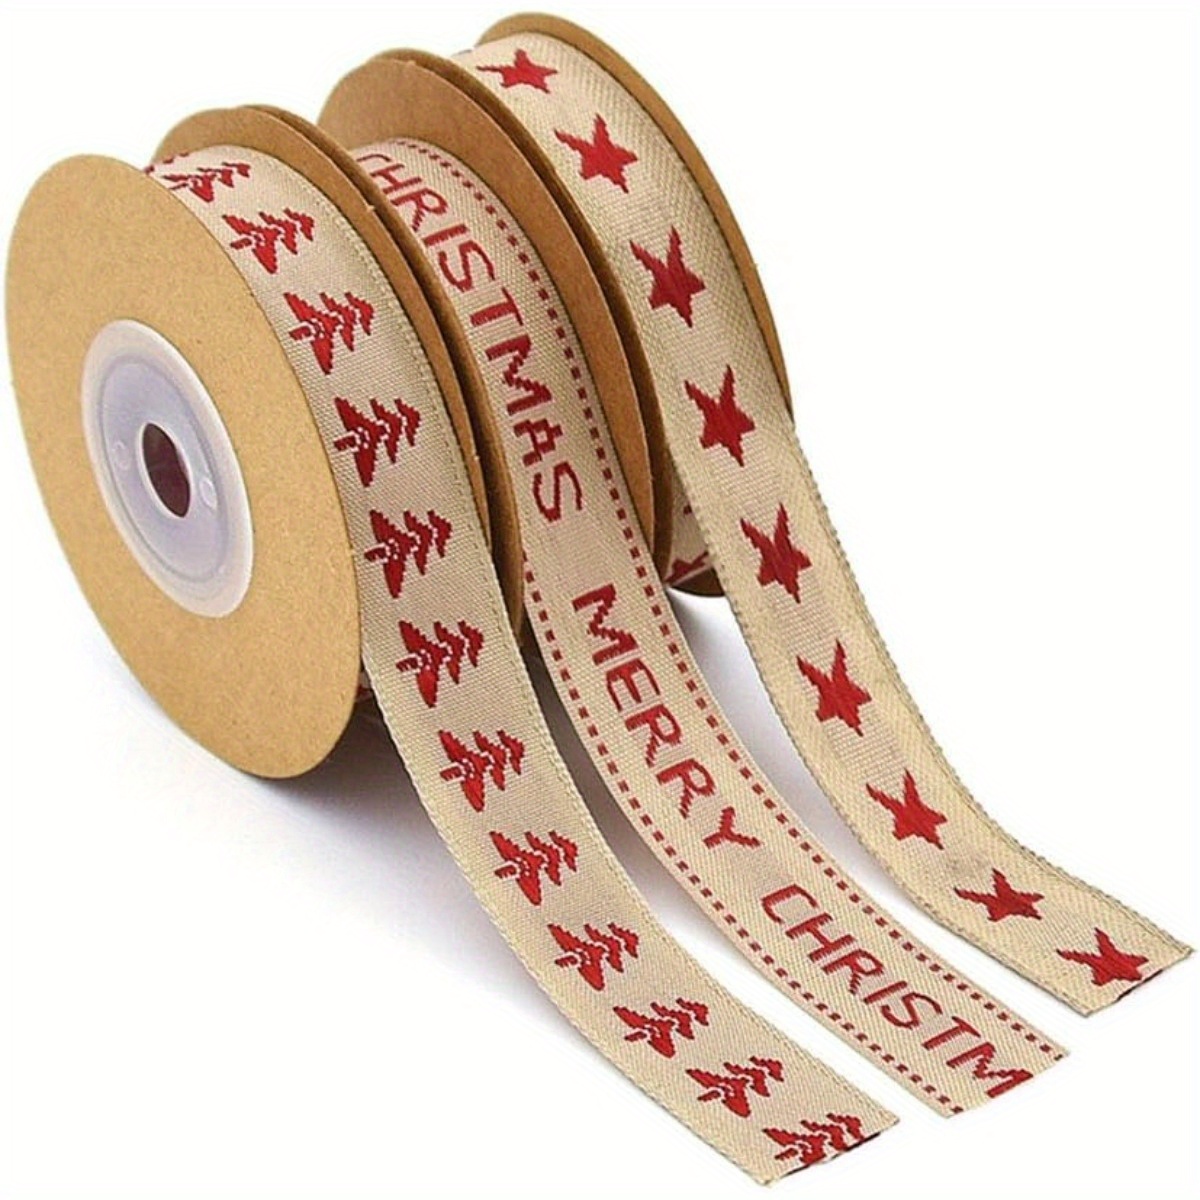 Metallic Bows Wrapping With Poly Wreaths Each Swags And For Ribbon Foil  Mesh Decorating Roll Home DIY Cardboard Wrapping Paper Chicken Christmas  Wrapping Paper Manga Wrapping Paper Postal Wrapping 